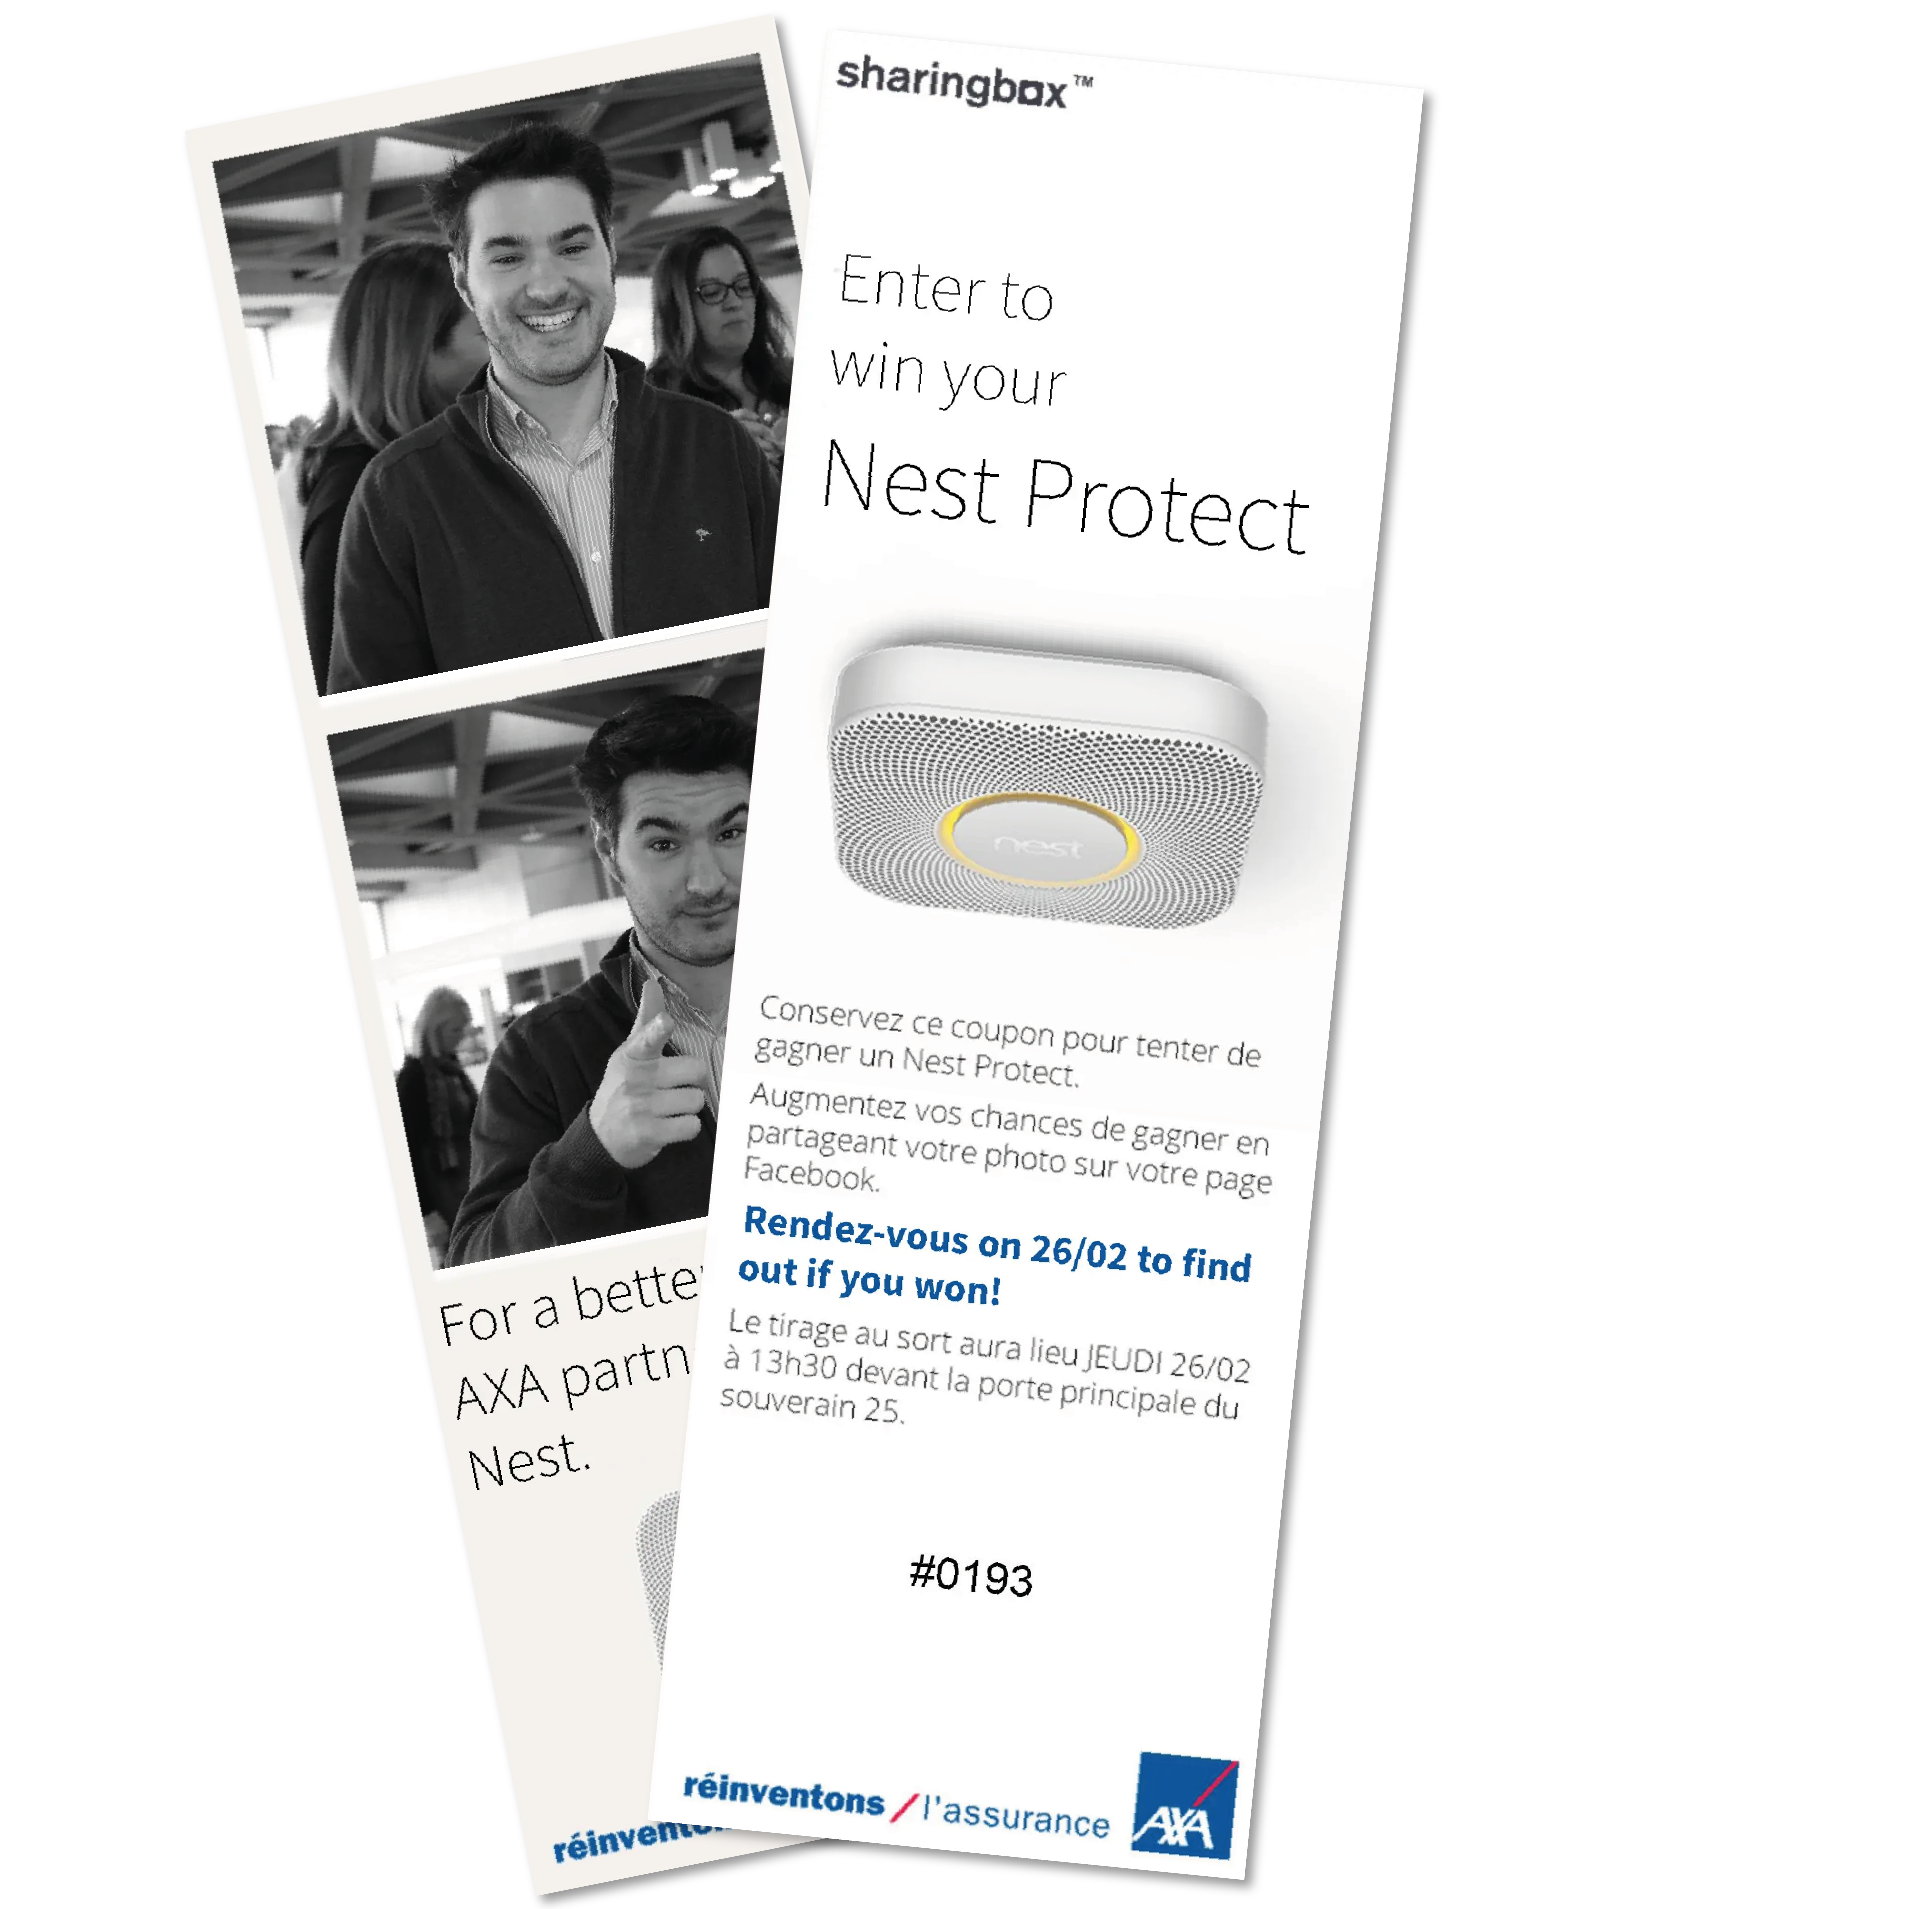 A promotional flyer from sharingbox featuring a young man, with details of a Nest Protect giveaway event in partnership with AXA insurance.